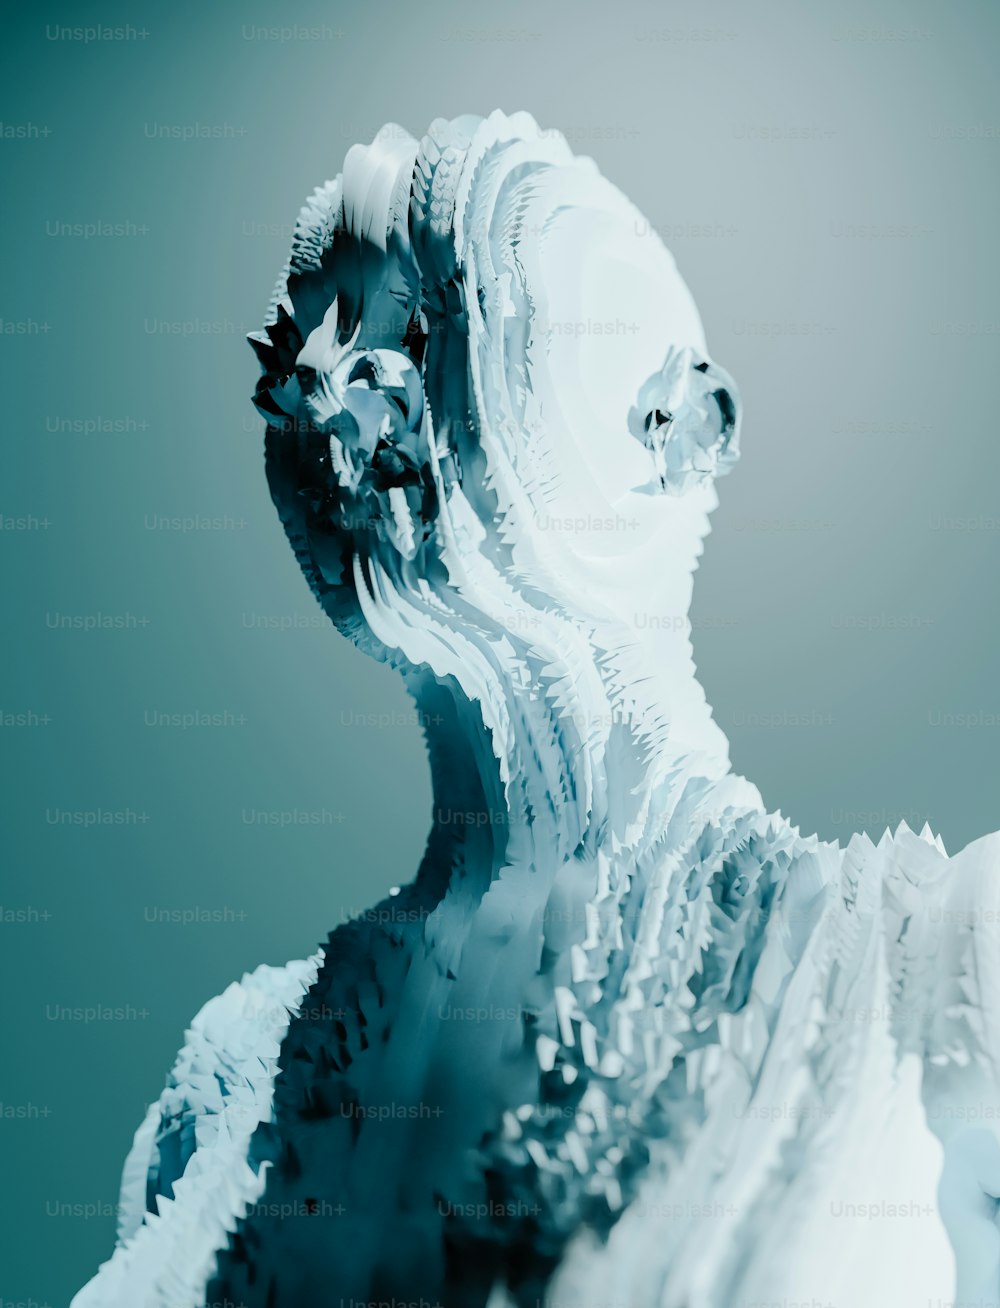 a sculpture of a person made of ice